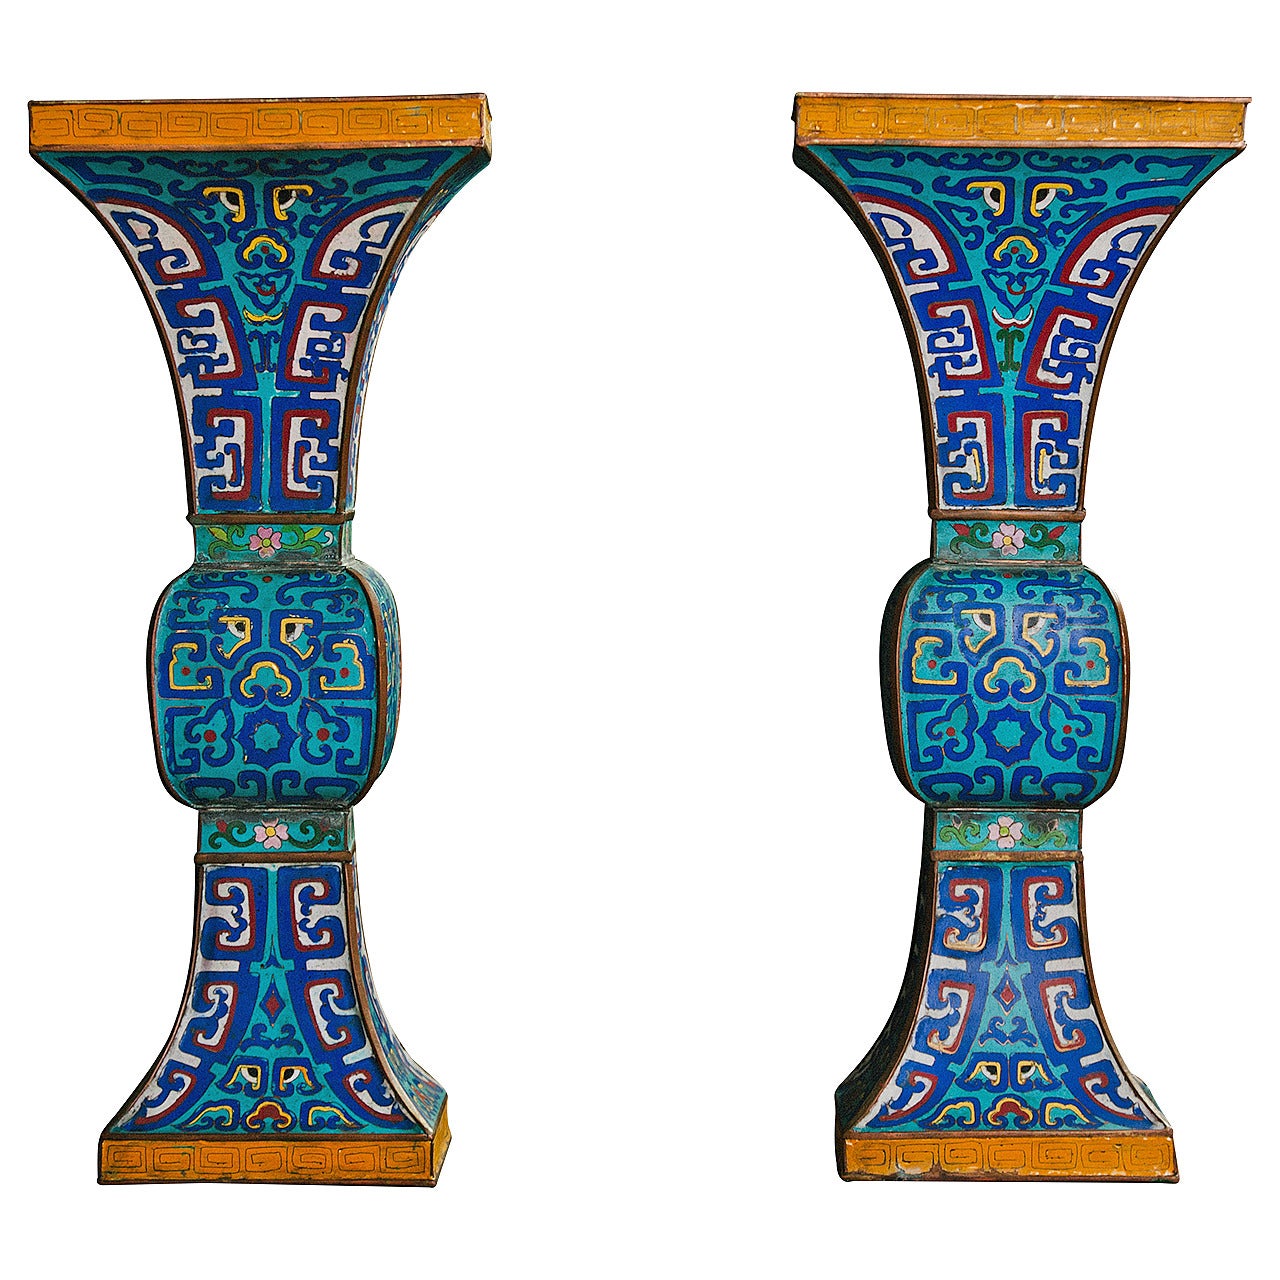 Pair of Stylish Mid-19th Century Ming Style Cloisonné